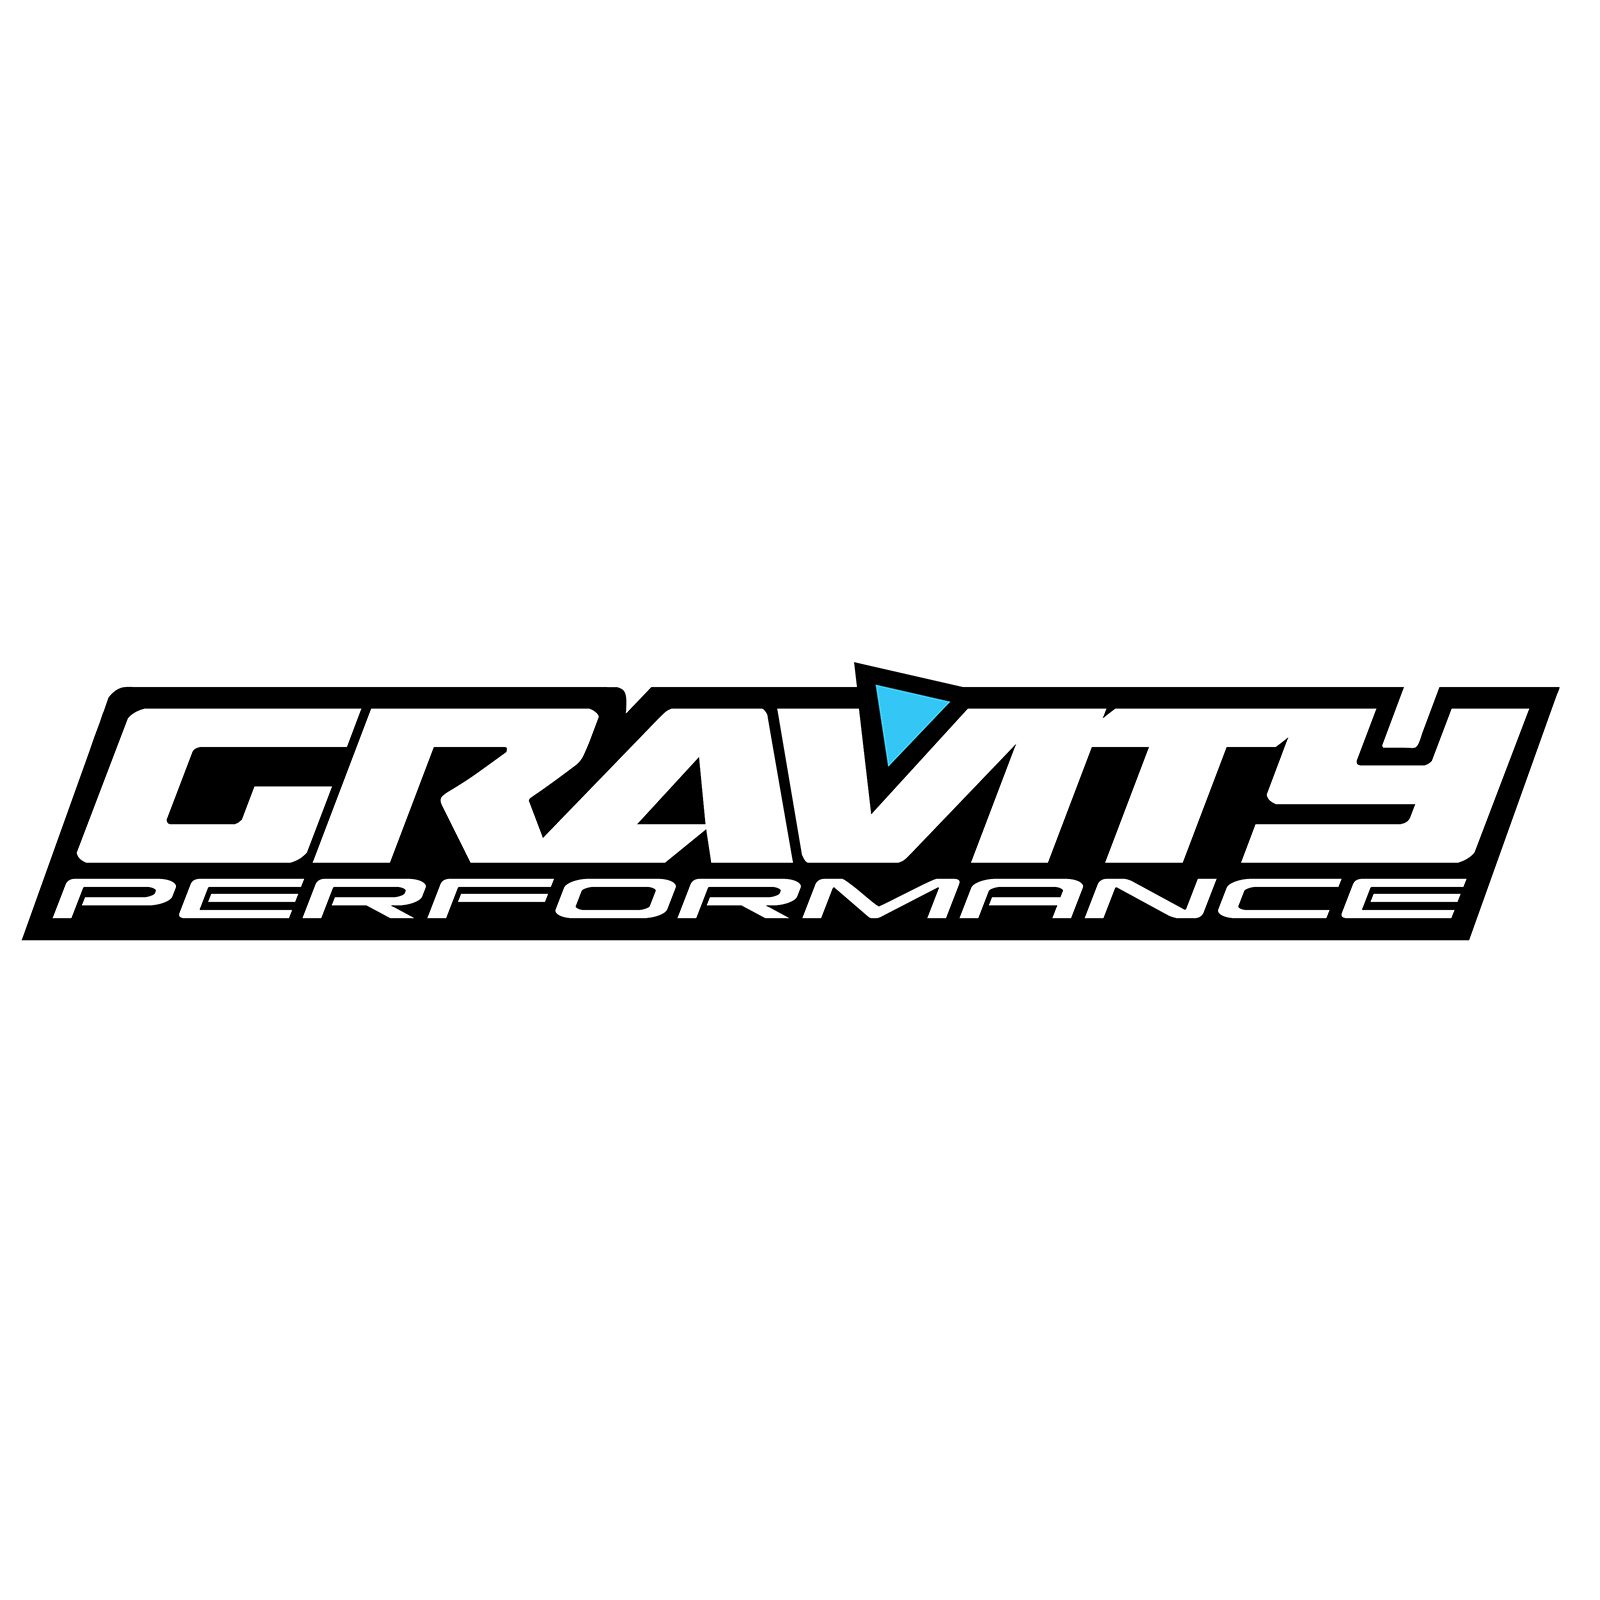 Gravity Performance Outline Logo Decal – 12″ White On Black + Blue Triangle